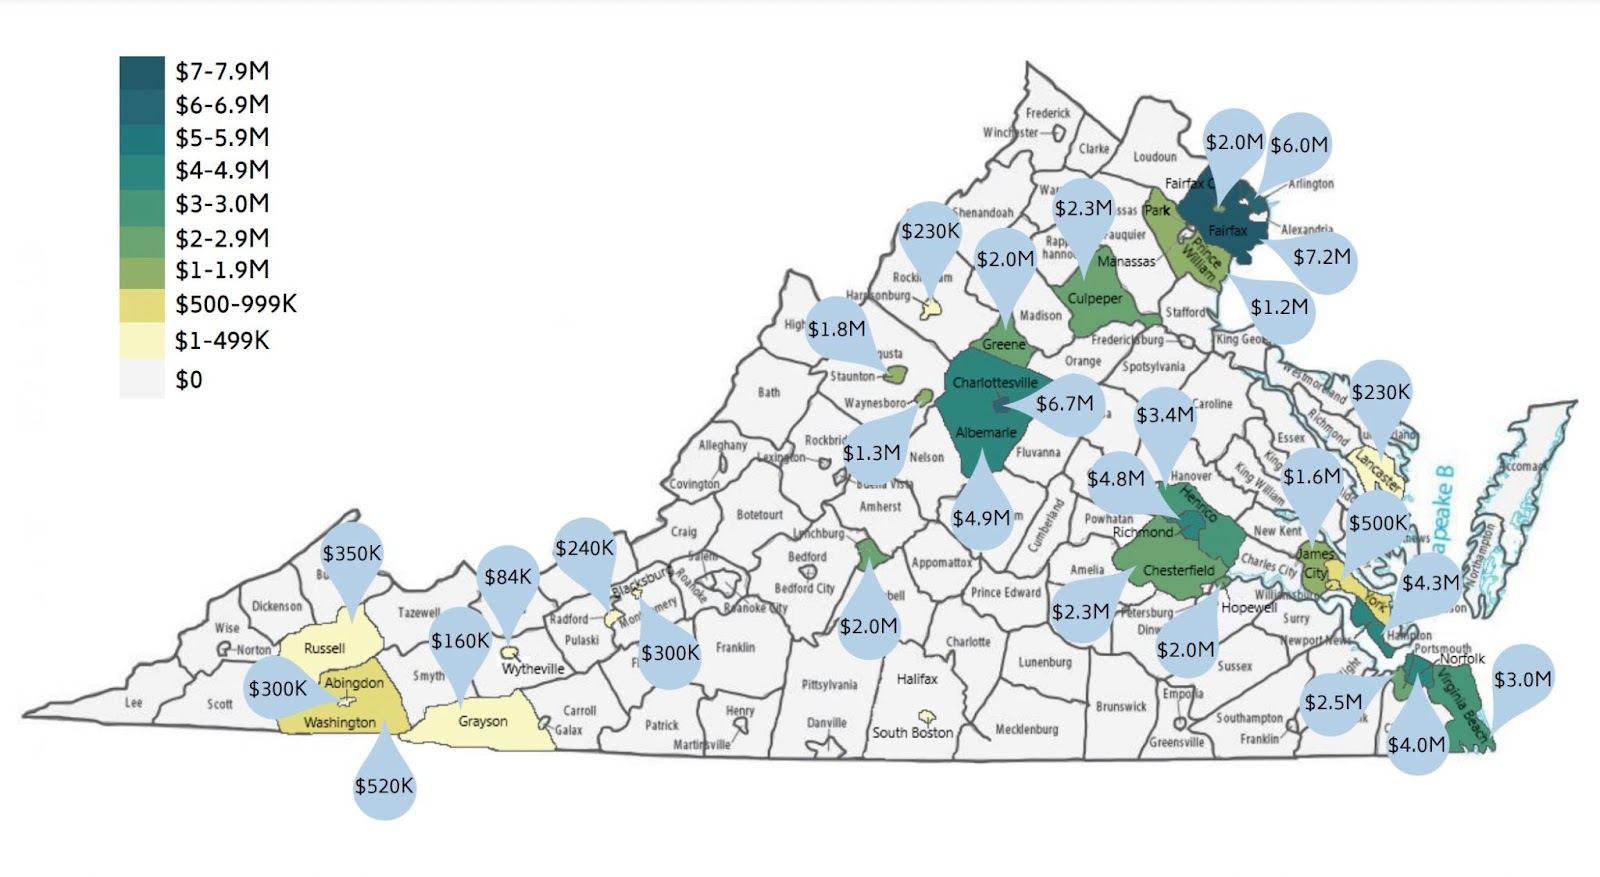 A map of Virginia shows all of the state's counties and cities. Most are white, but a few are colored different shades of yellow and green. Beside each colored county are dollar amounts.